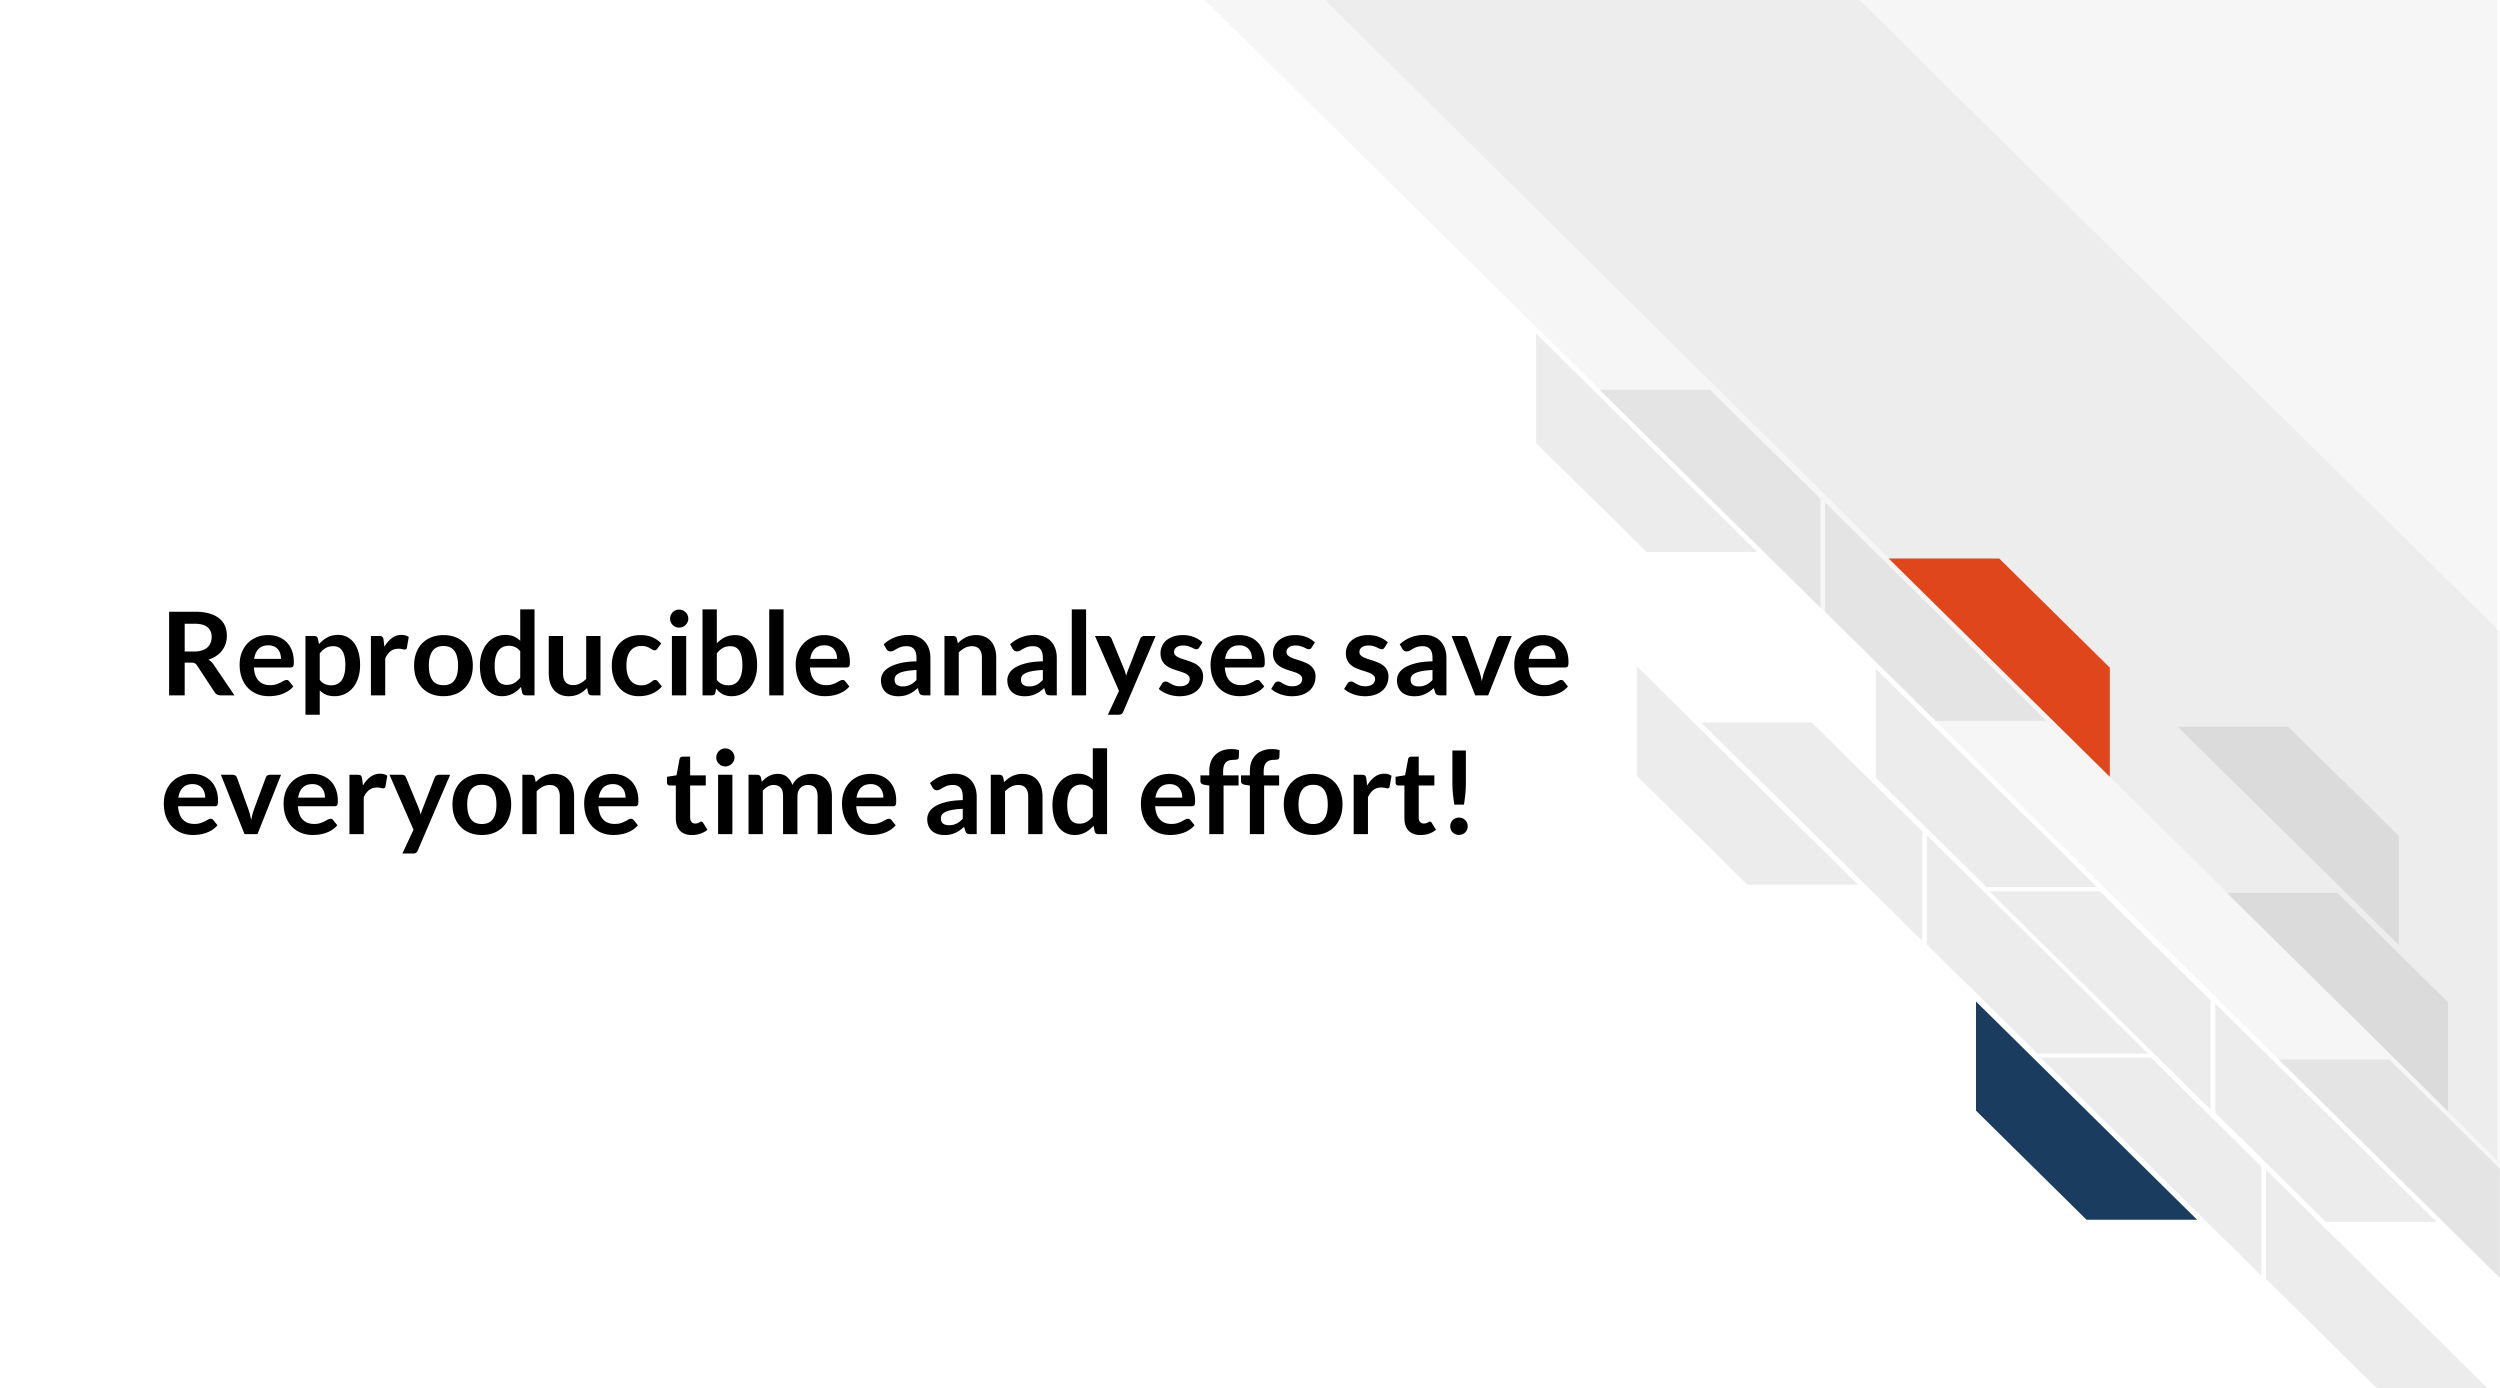 Reproducible analyses save everyone time and effort!